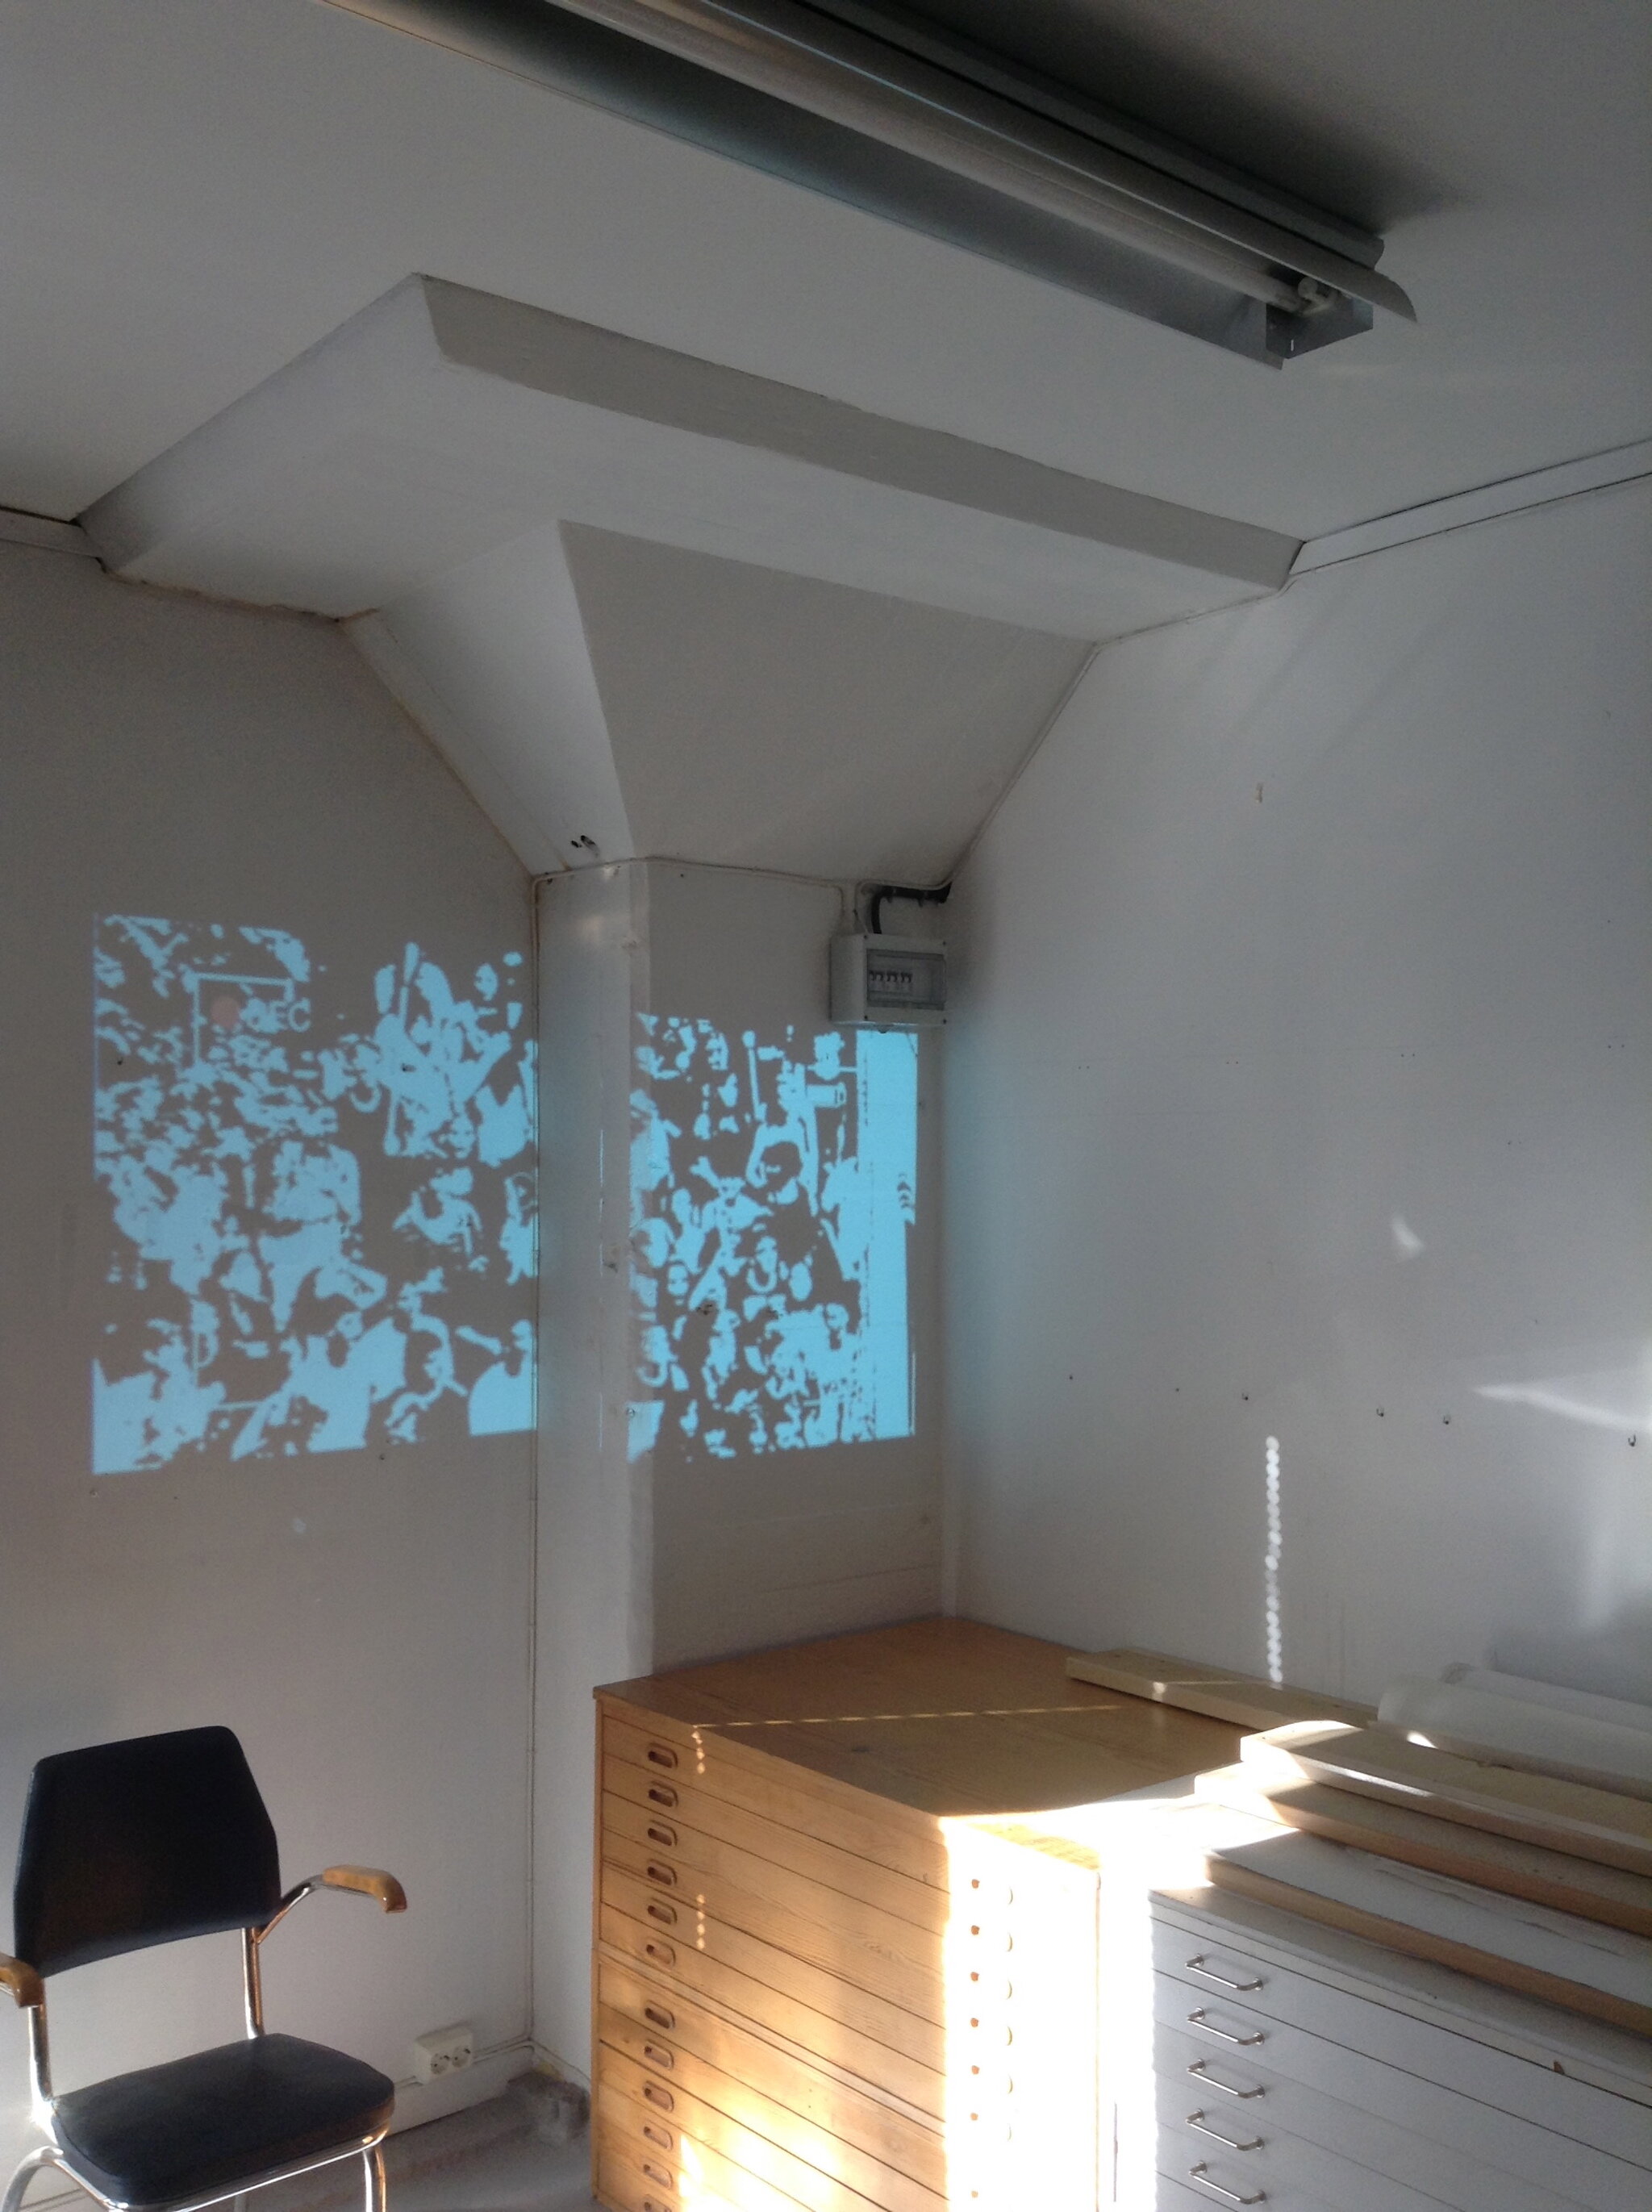 View from projection in studio